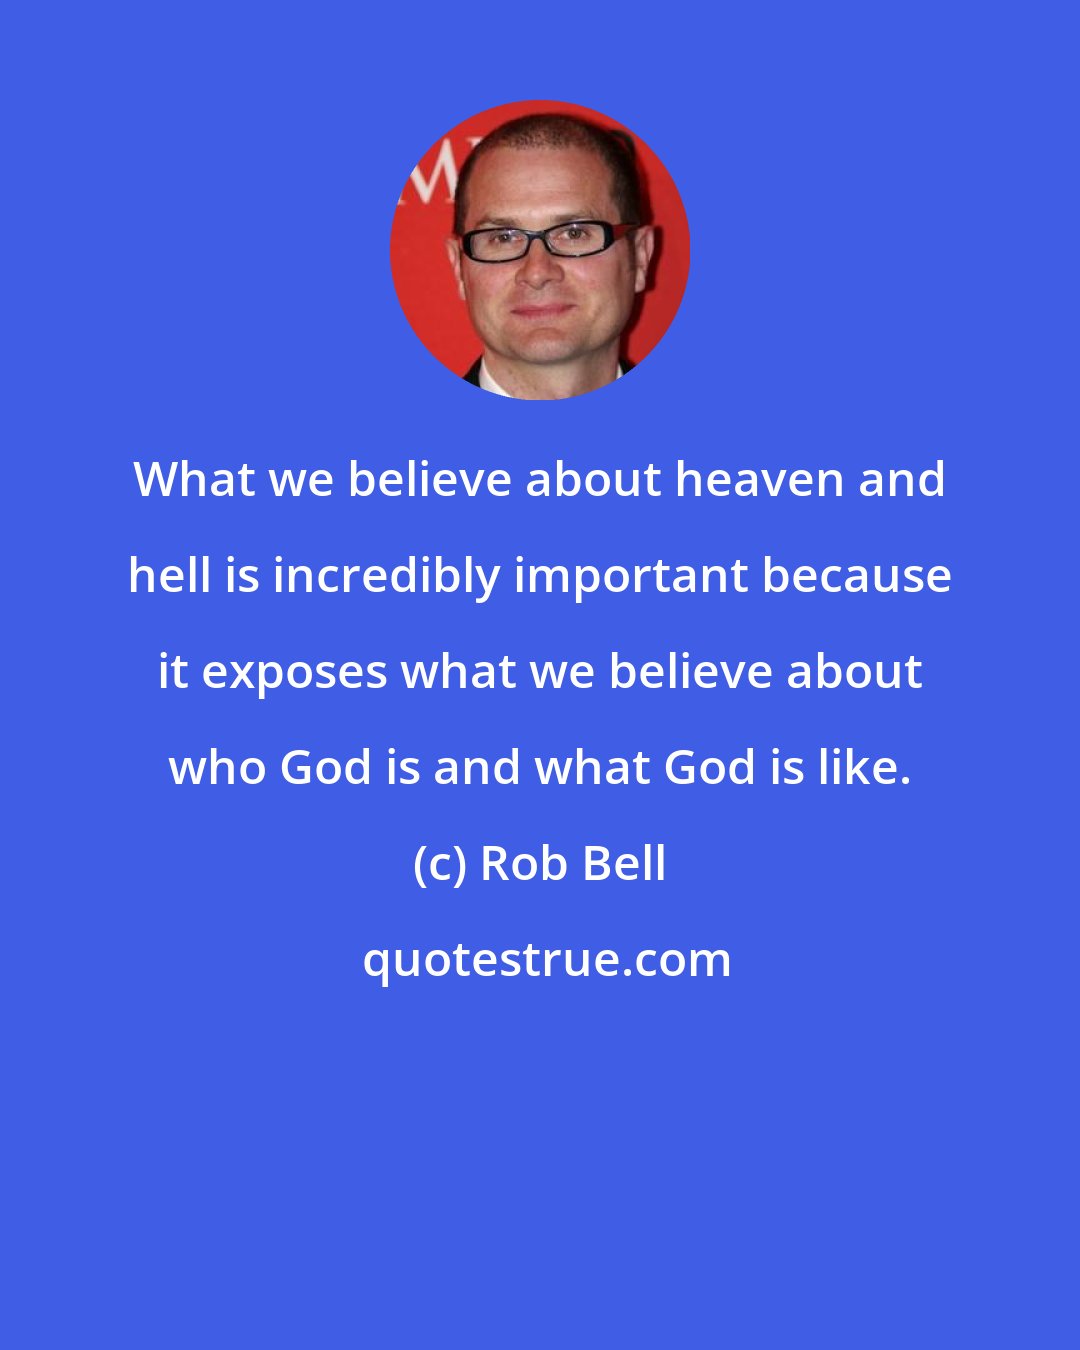 Rob Bell: What we believe about heaven and hell is incredibly important because it exposes what we believe about who God is and what God is like.